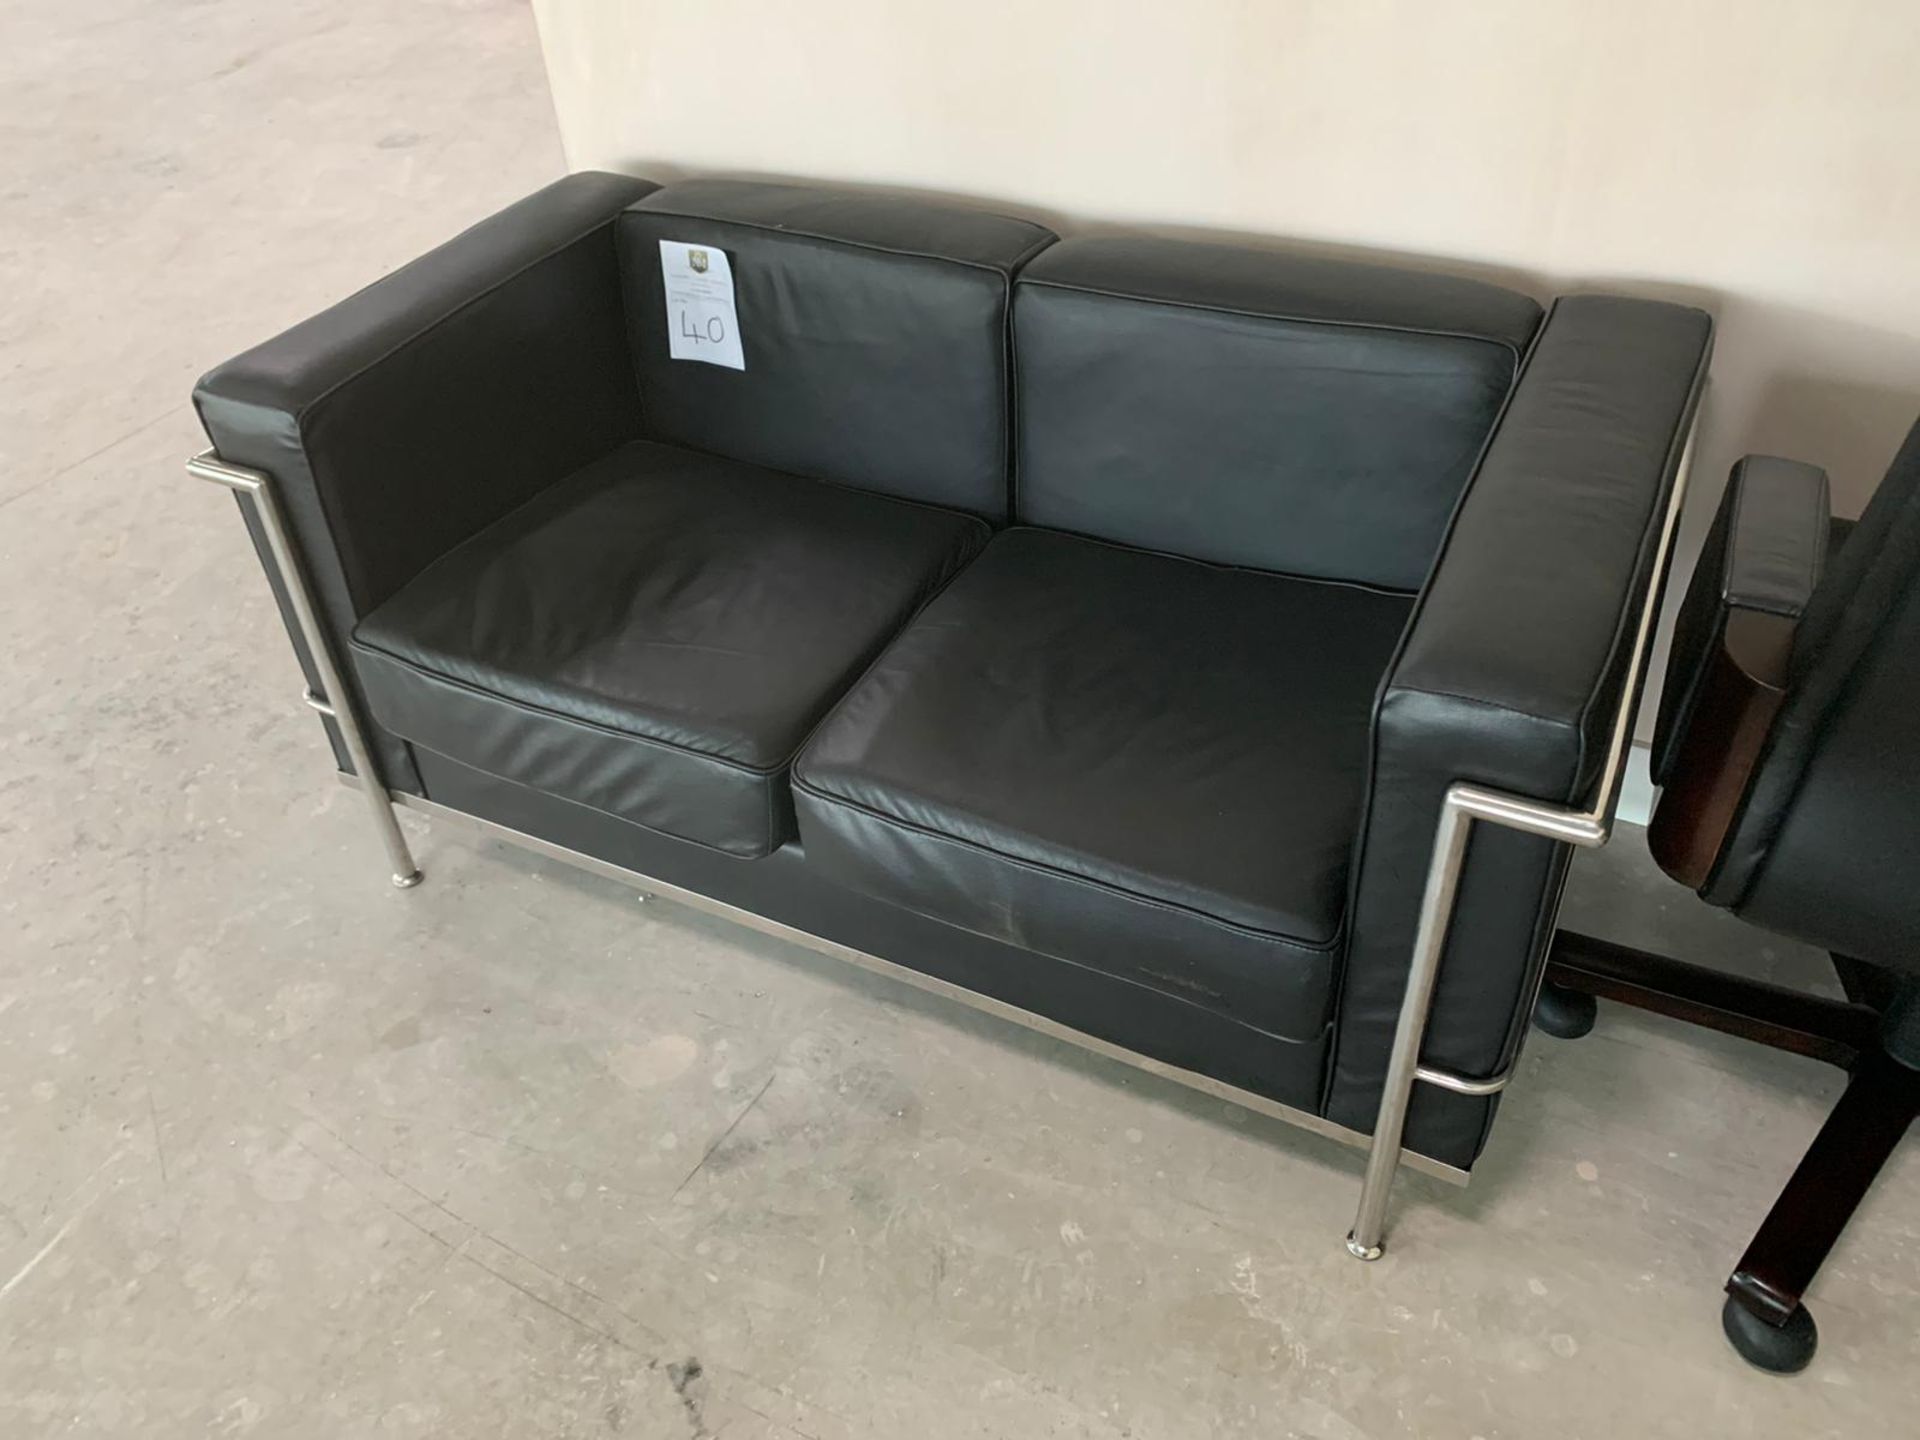 Black Leather Two Seater Sofa with Chrome Legs - Image 3 of 4